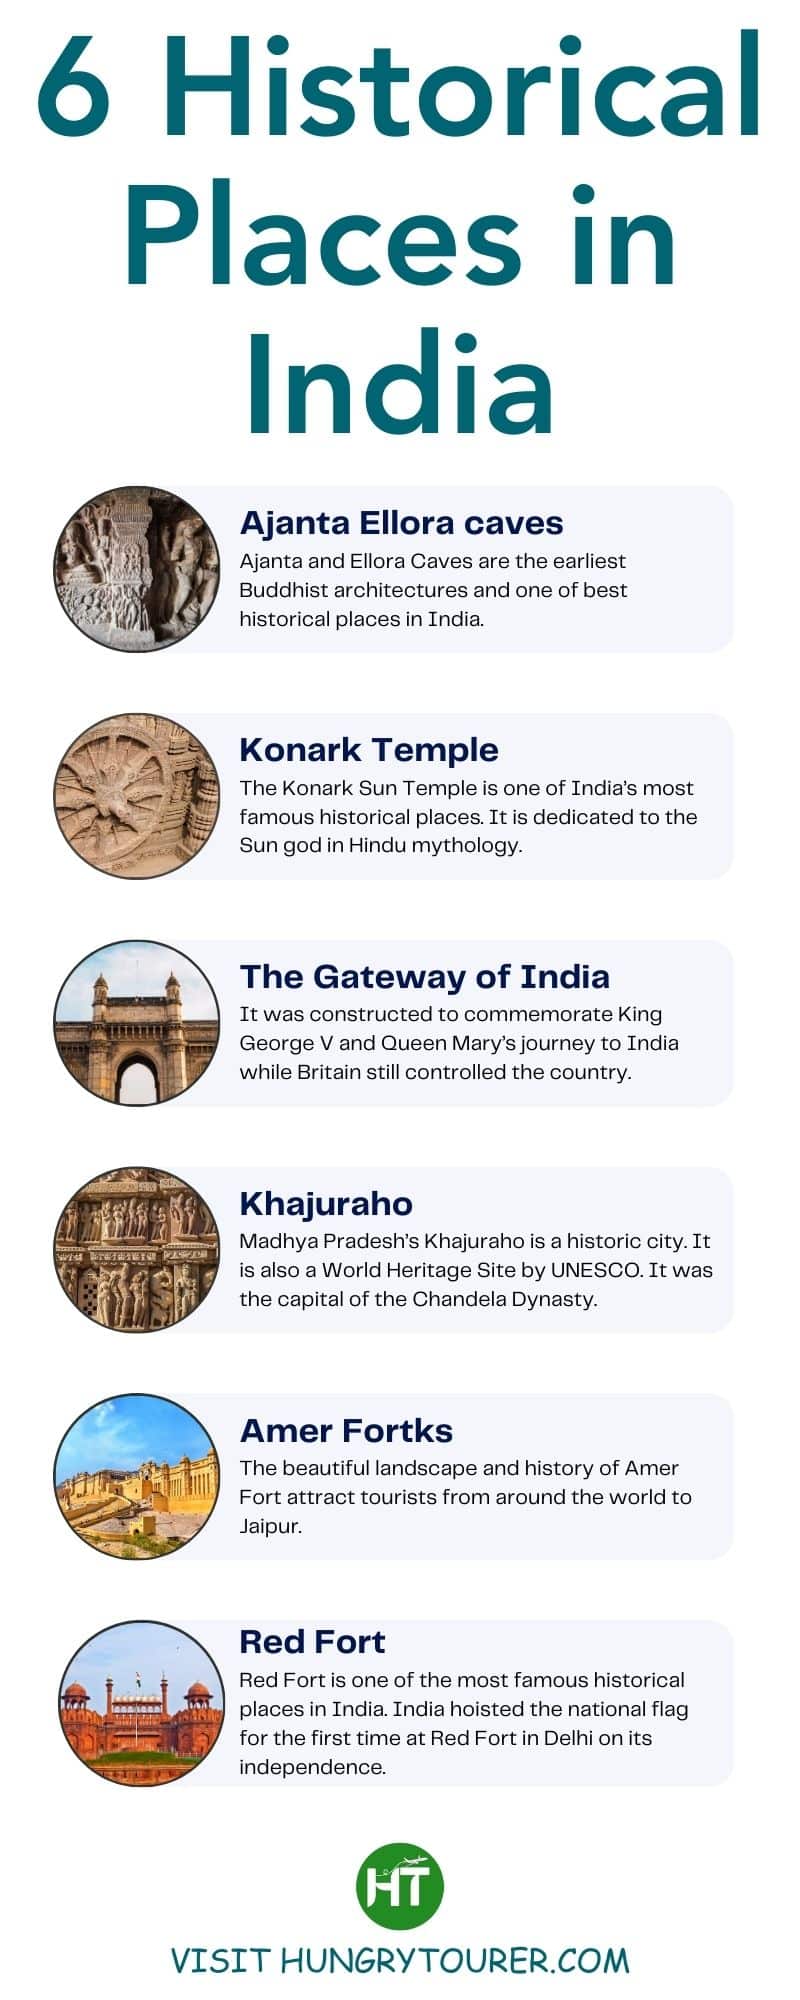 6 Historical Places in India